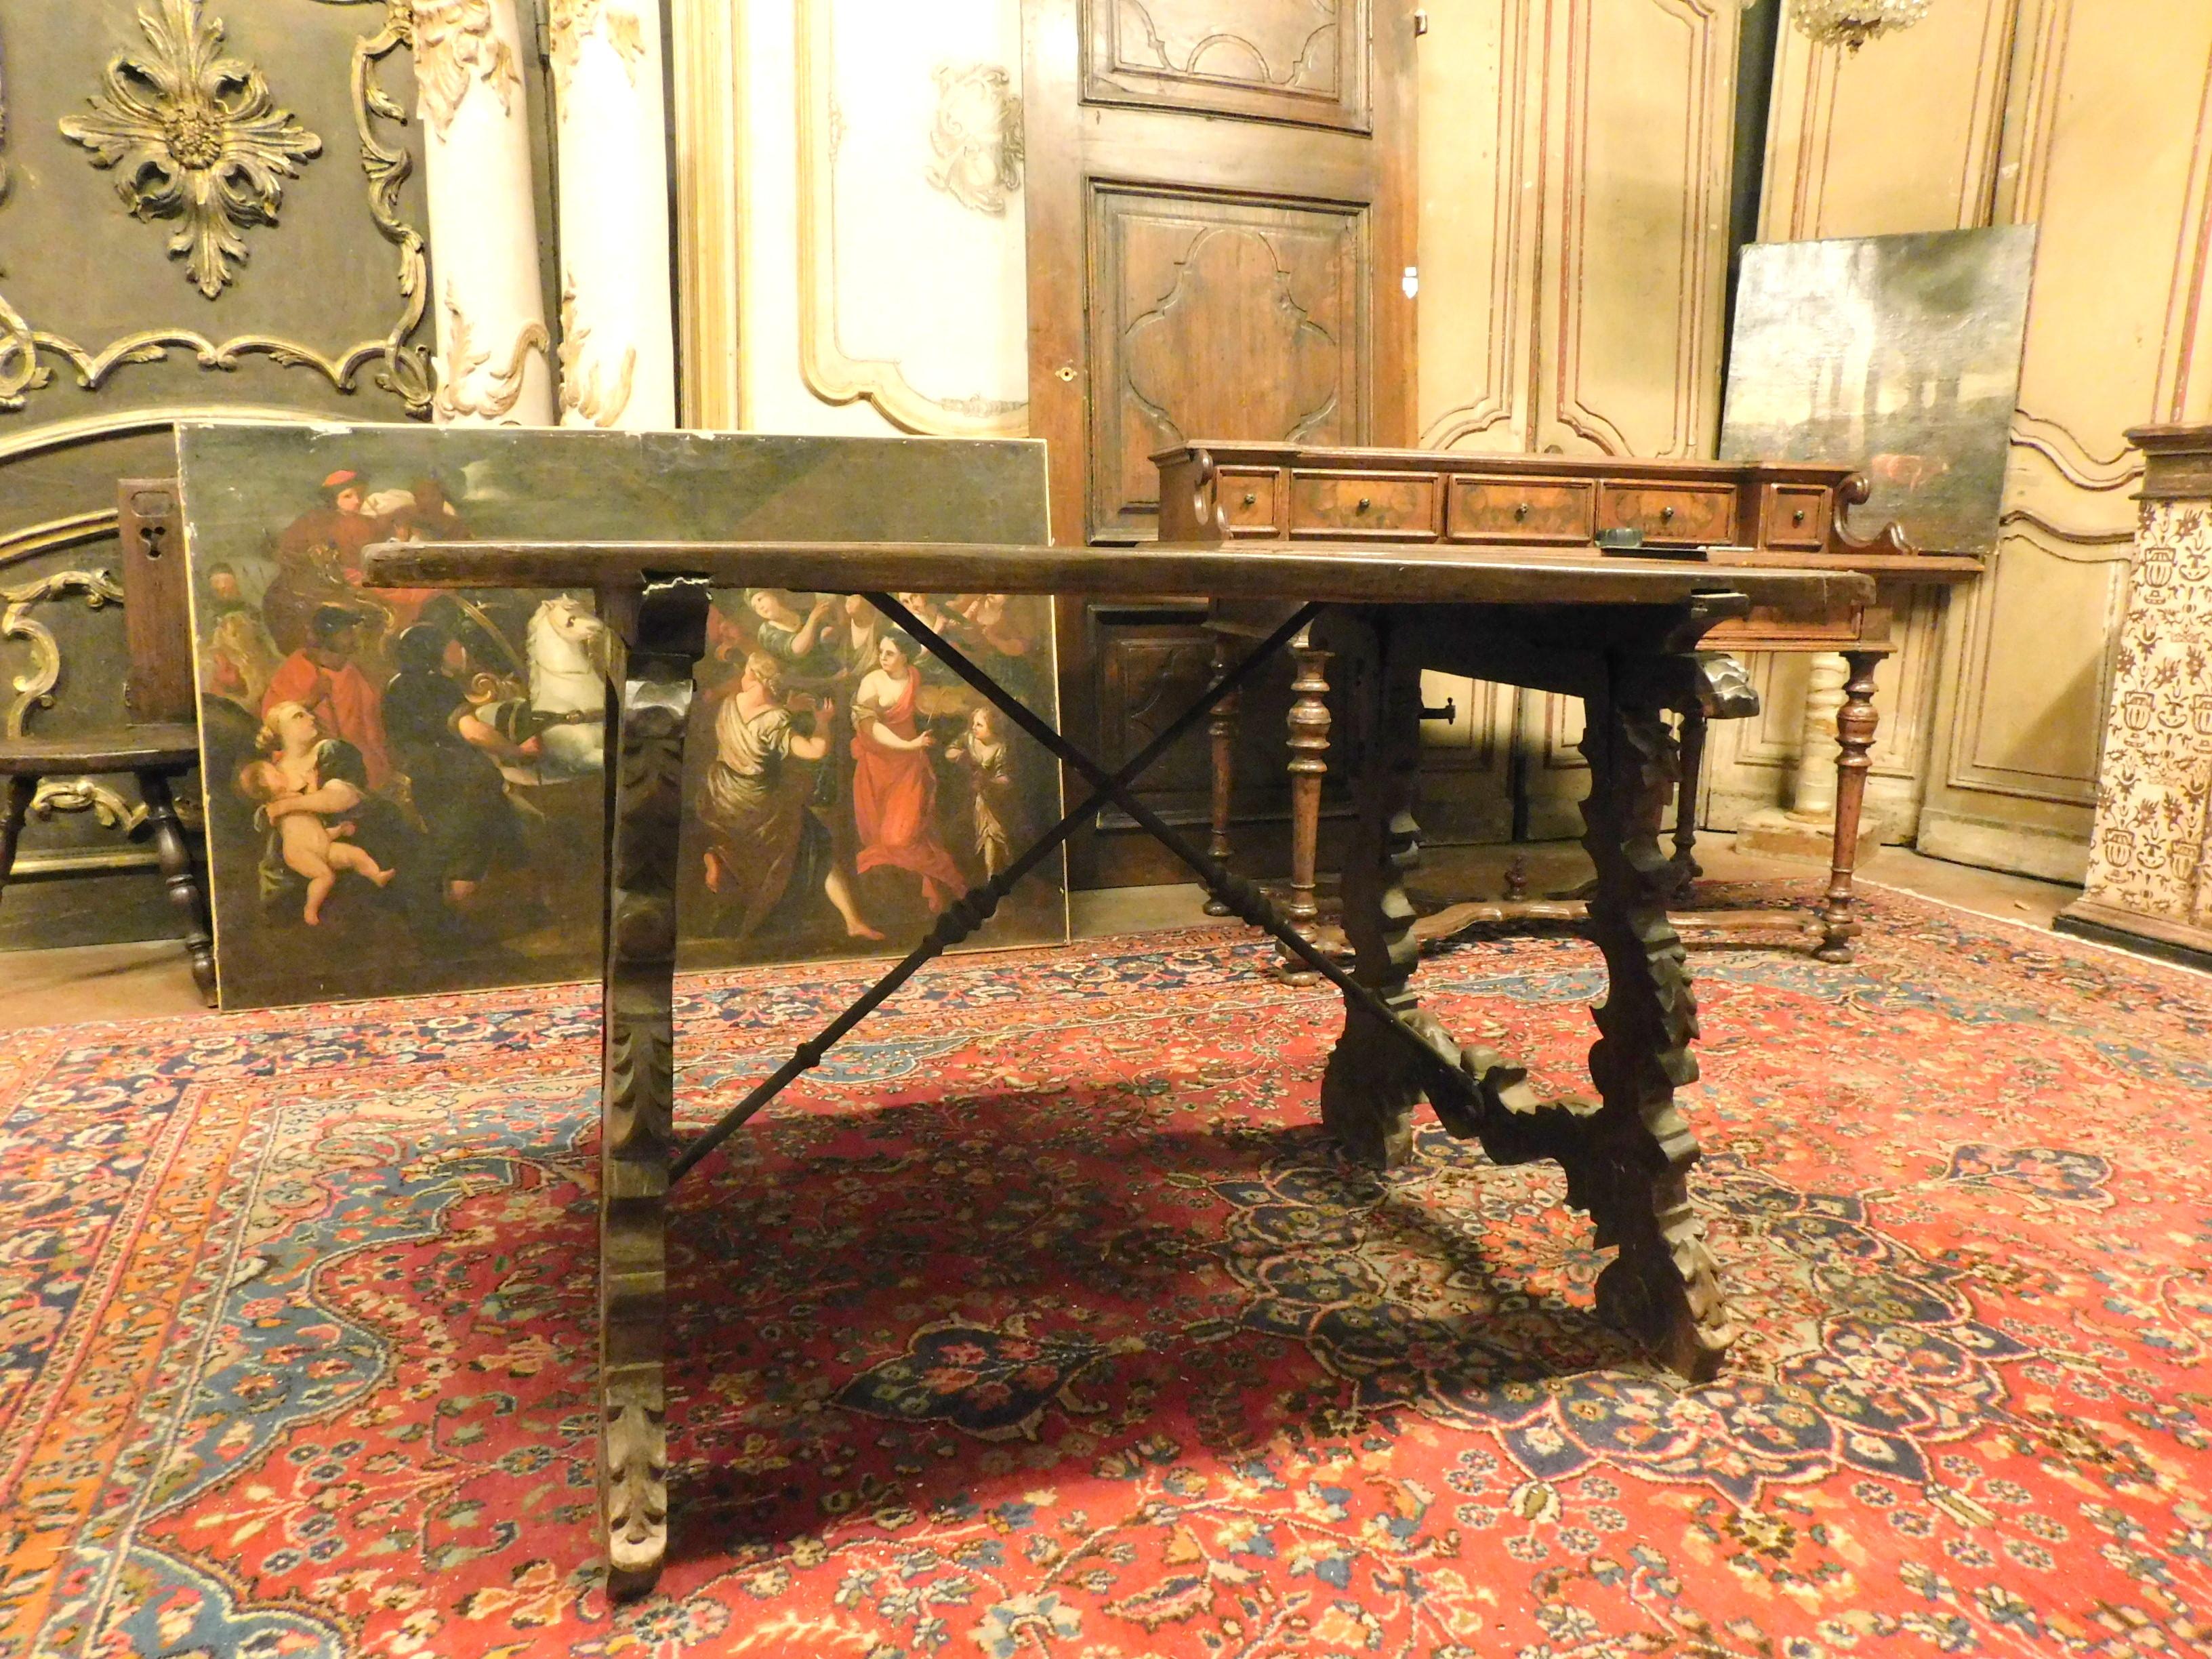 Hand-Carved Antique Refectory Table in Walnut, Wavy Legs and Iron, 18th Century Spain For Sale